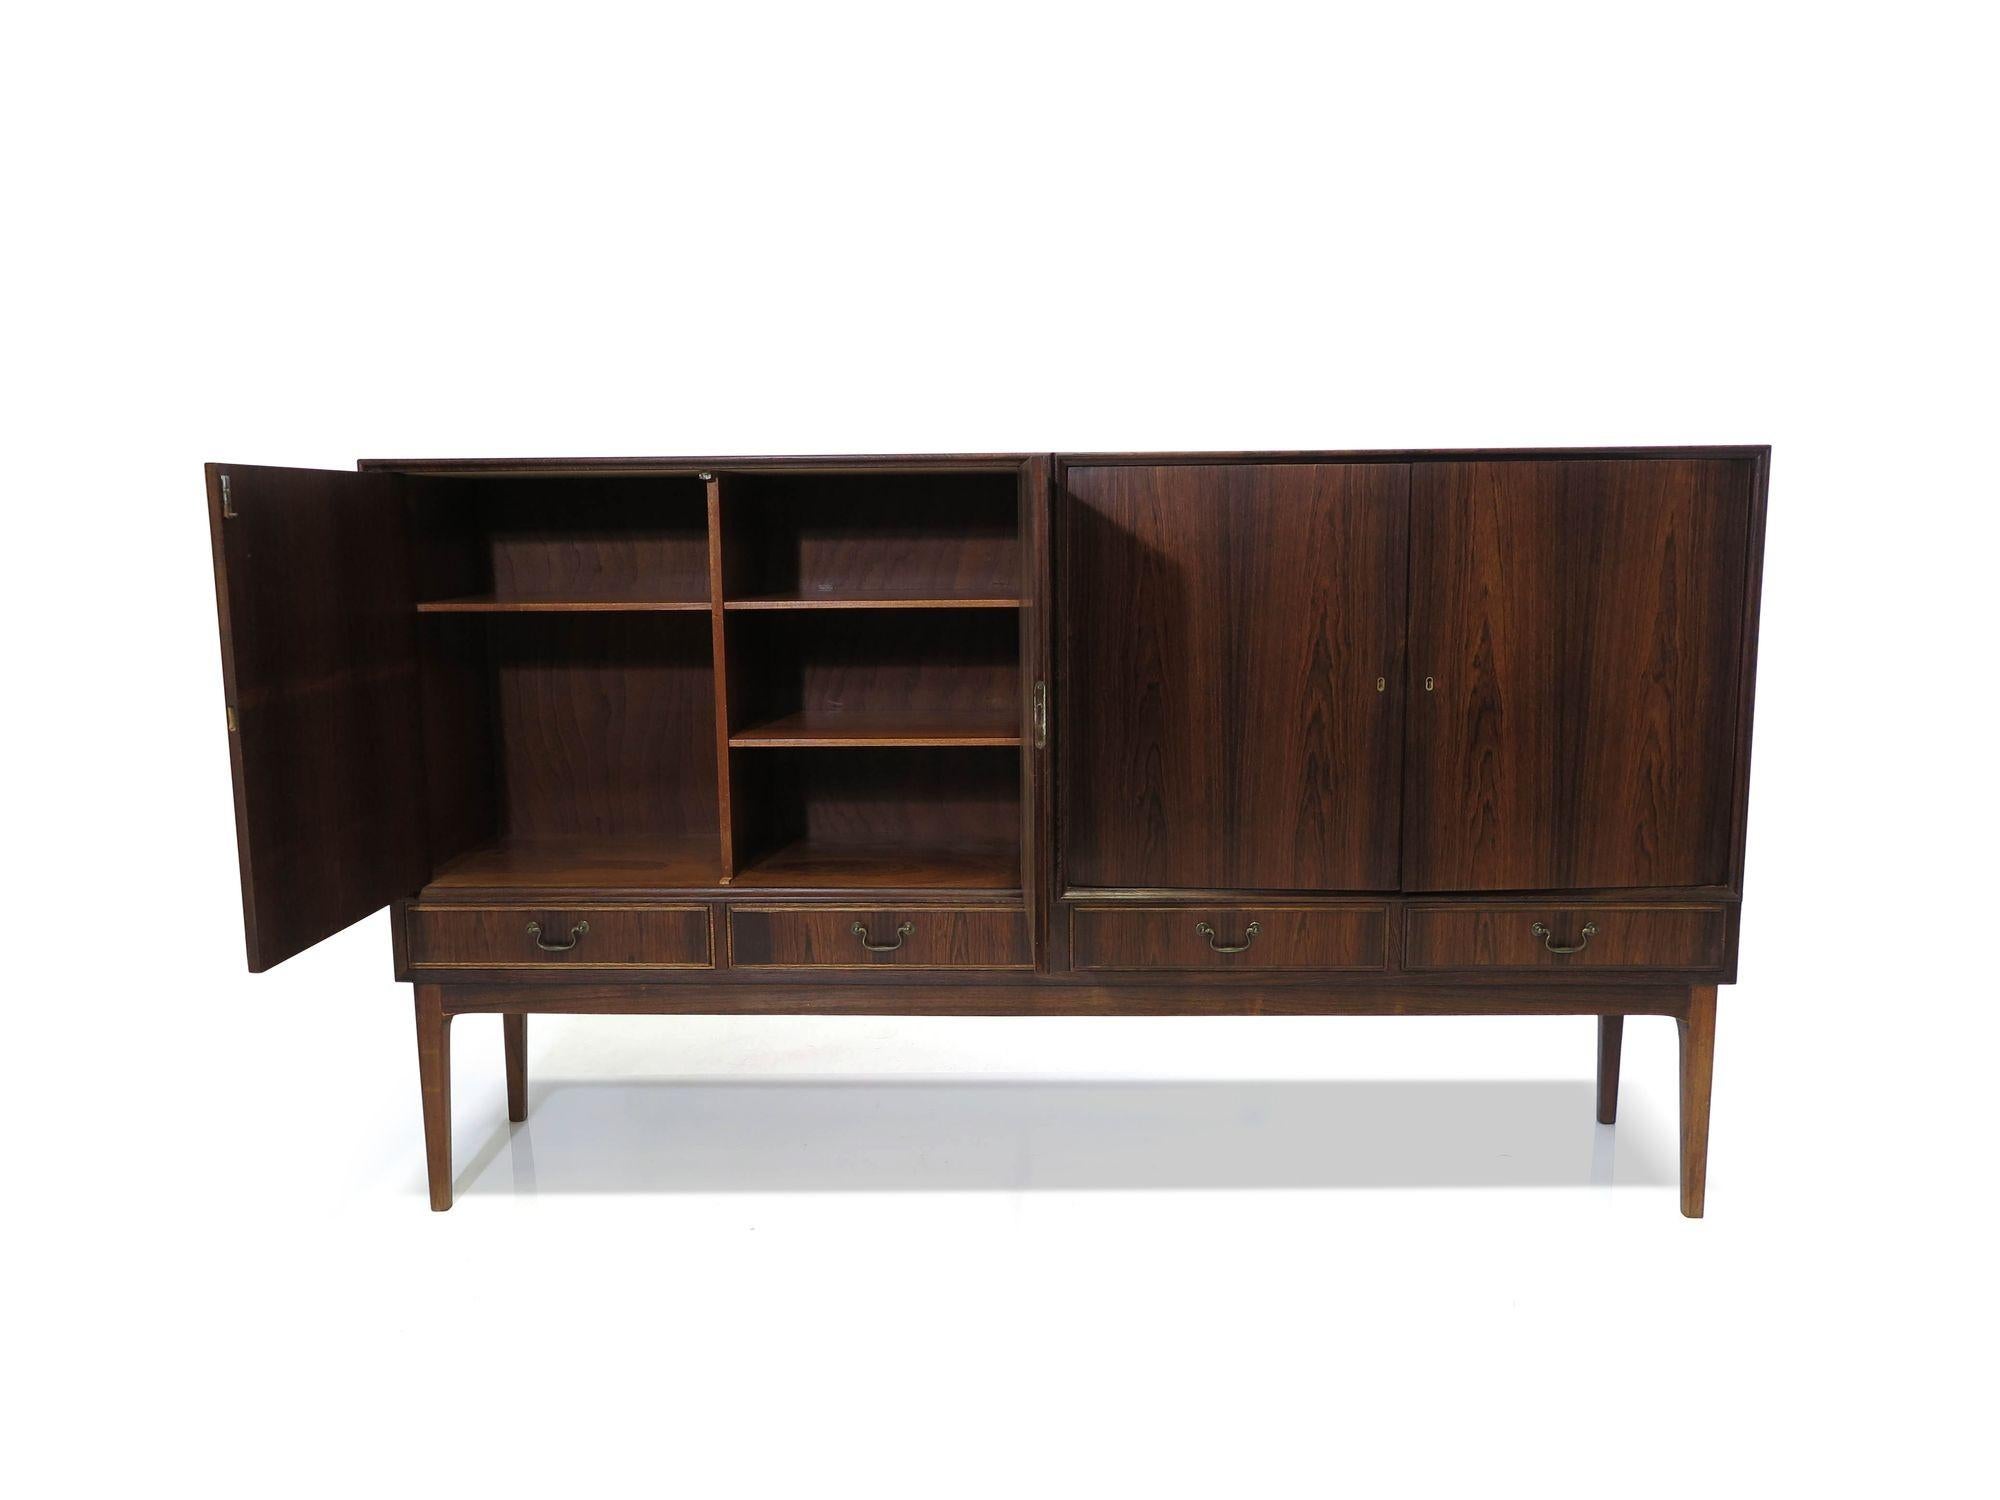 Brazilian Rosewood Sideboard attributed to Ole Wanscher, Features rich Brazilian rosewood with book-matched locking doors and drawers. The doors open to reveal an interior of mahogany with silverware drawers and adjustable shelves. The quality